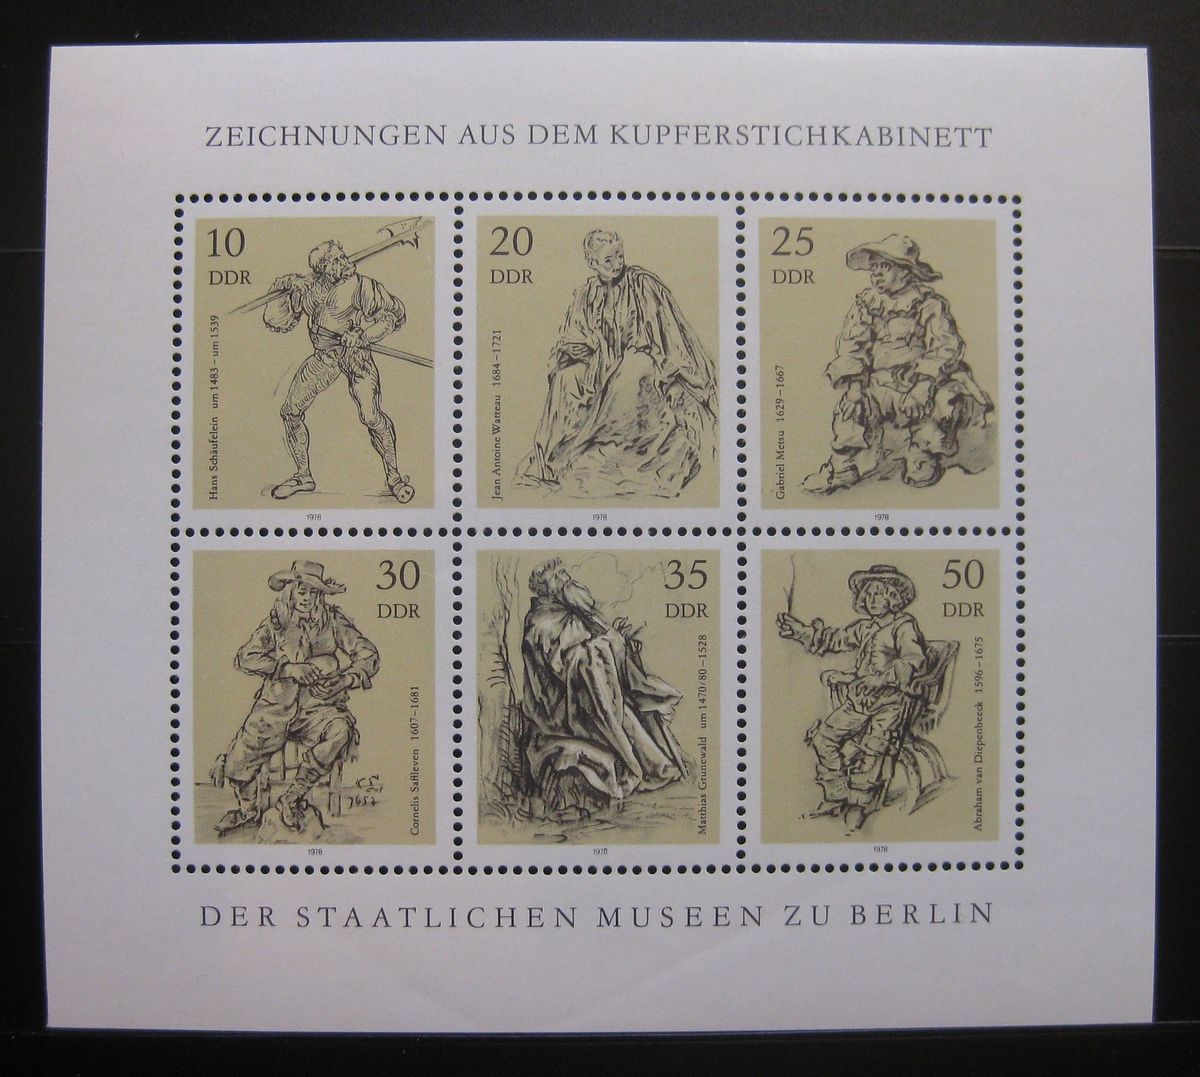 GDR GERMANY EAST 1978 ETCHINGS FROM BERLIN MUSEUMS SHEET SC# 1940a MNH